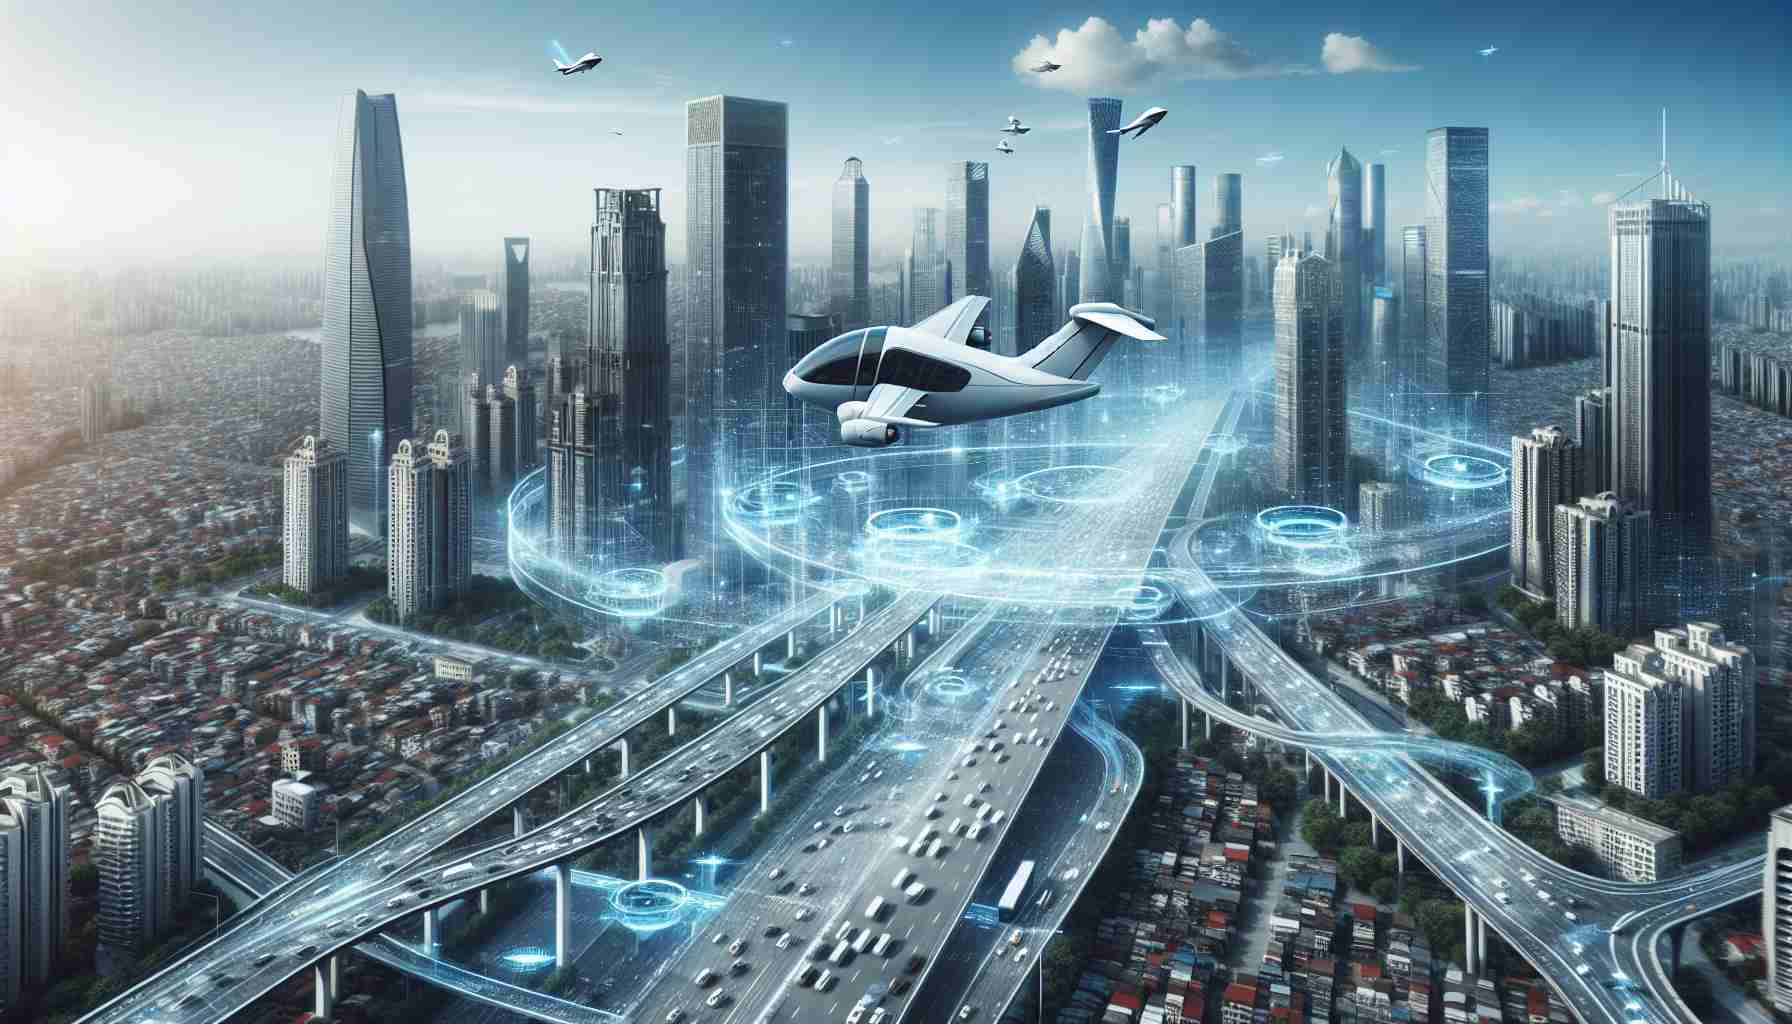 A high-definition, realistic photo depicting the futuristic concept of urban transportation being revolutionized. Represent the idea of collaboration between a traditional airline and a high-tech aviation company. Illustrate a modern city, perhaps with busy roads and towering skyscrapers, where flying vehicles, inspired by the innovation and expertise of an airline company and a modern aviation company, are seamlessly integrated into the cityscape.